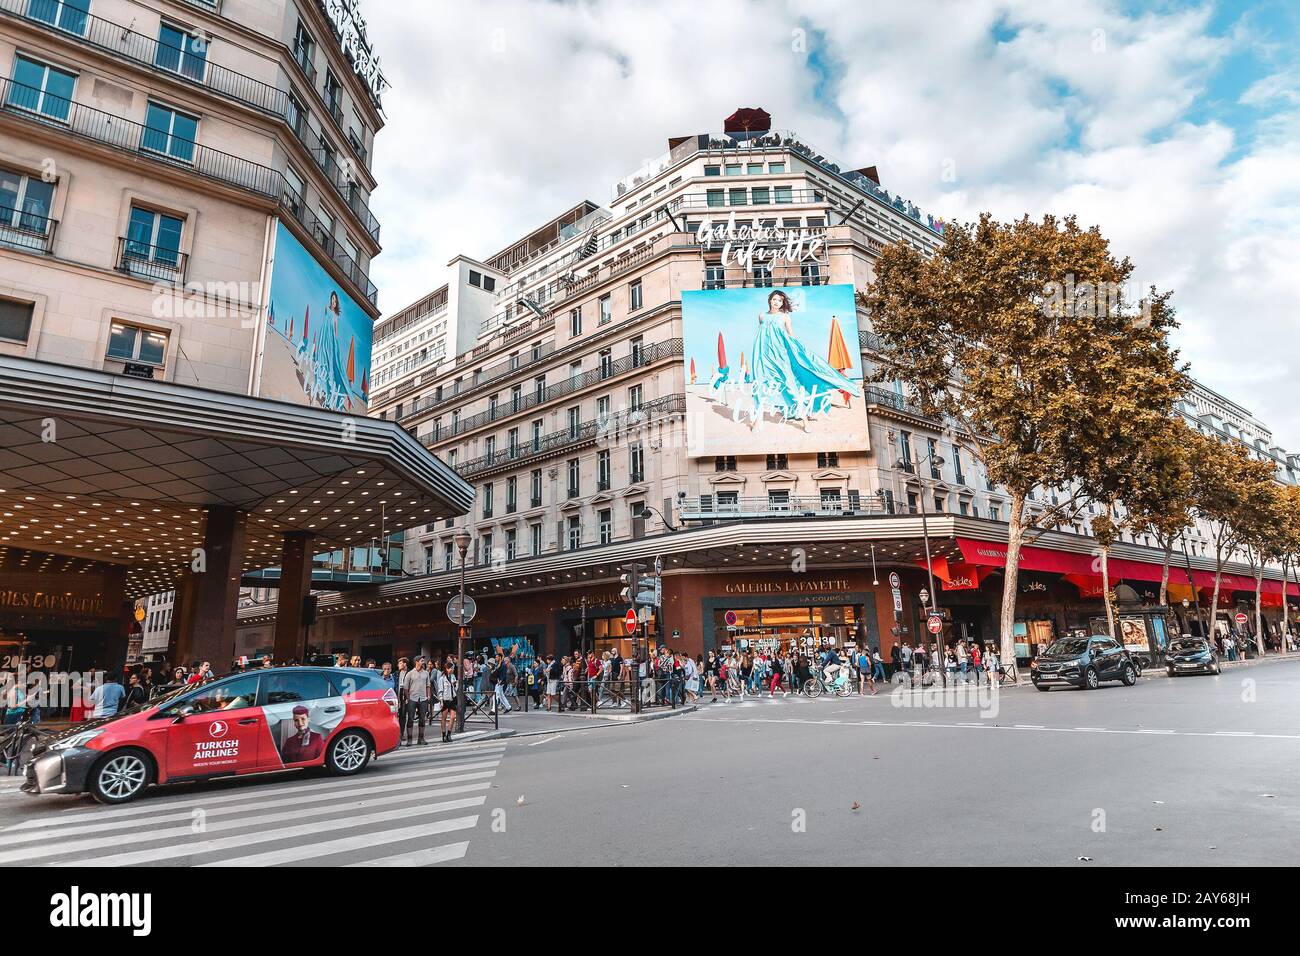 27 July 2019, Paris, France: The facade of the famous Shopping Center in Paris - Galerie Lafayette. View from the street Stock Photo